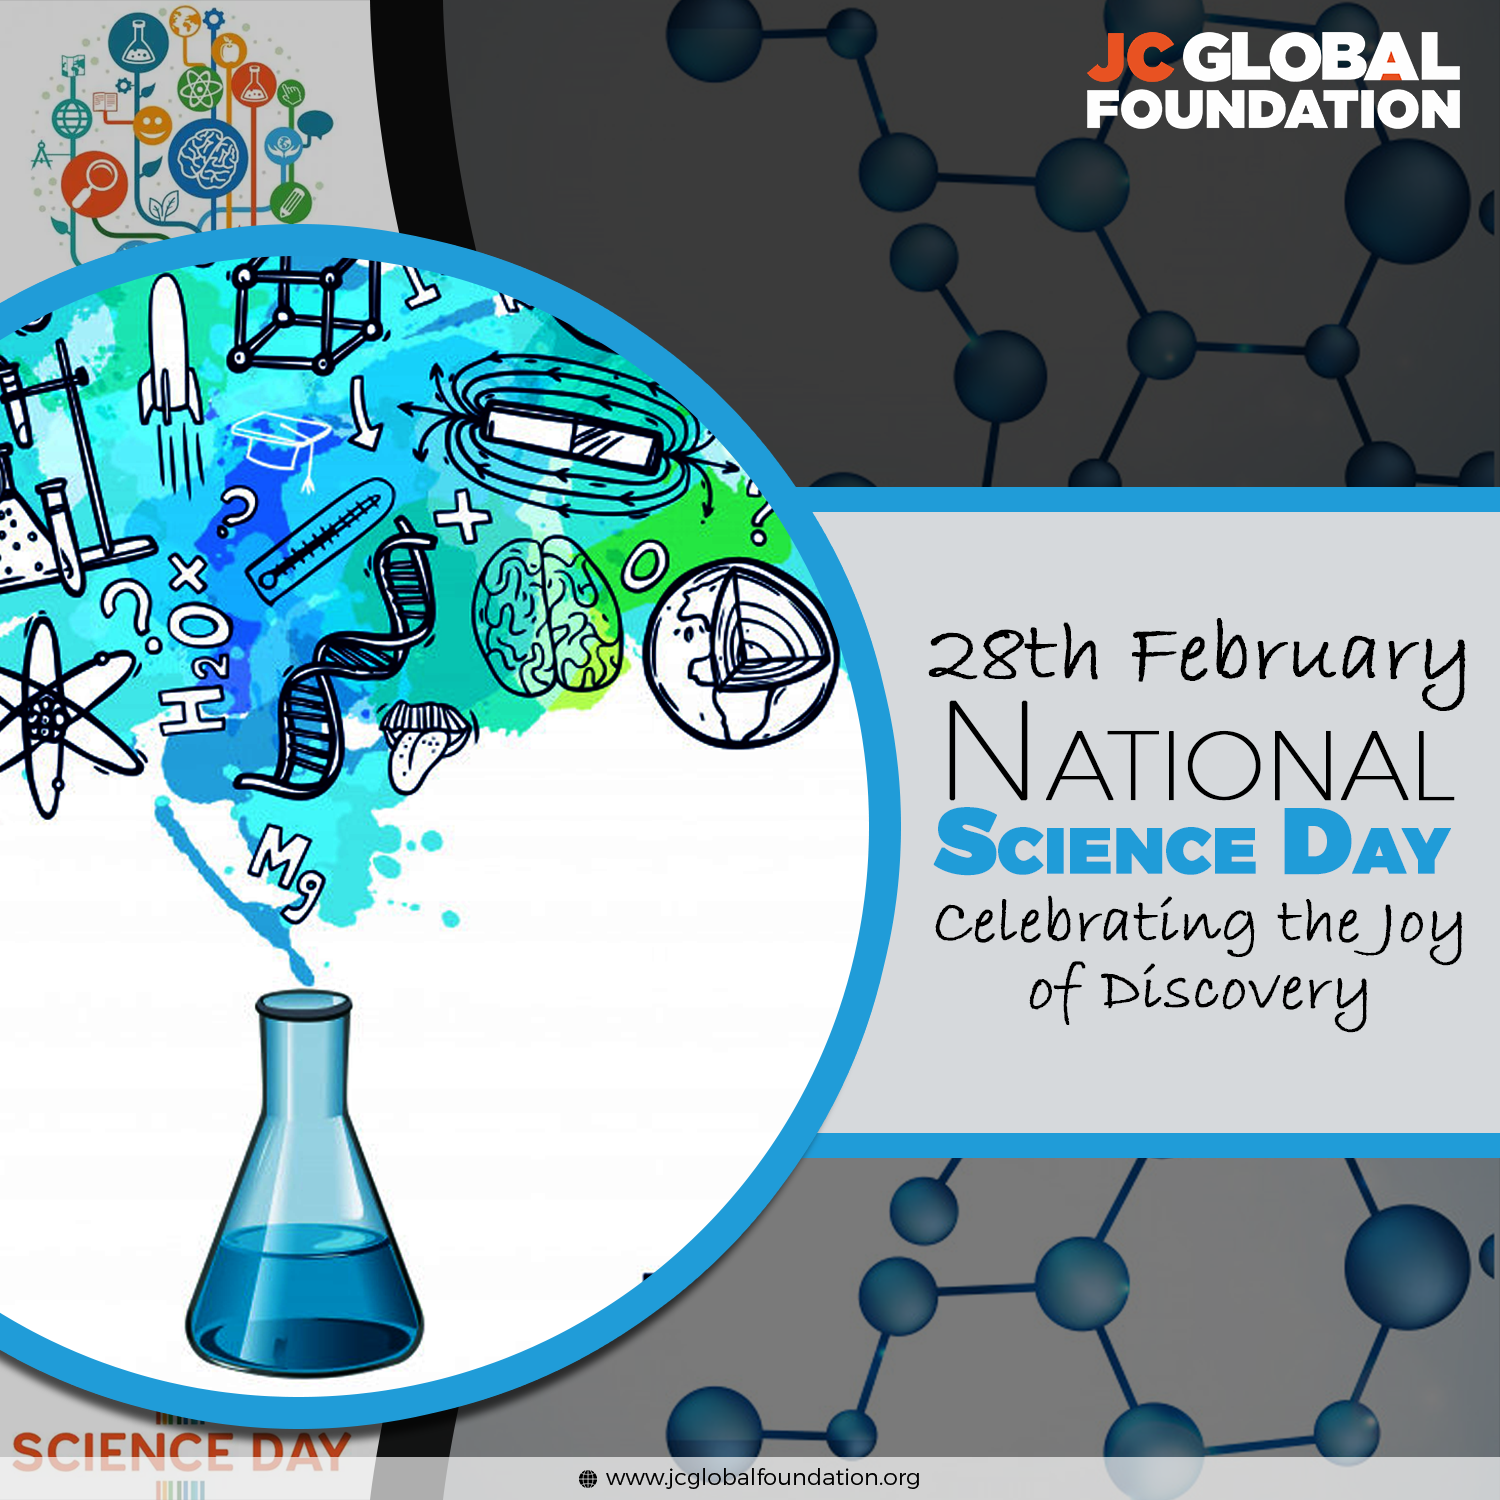 RIMT News: RIMT CAMPUS booms with the celebrations of the NATIONAL SCIENCE  DAY, 28th Feb 2013